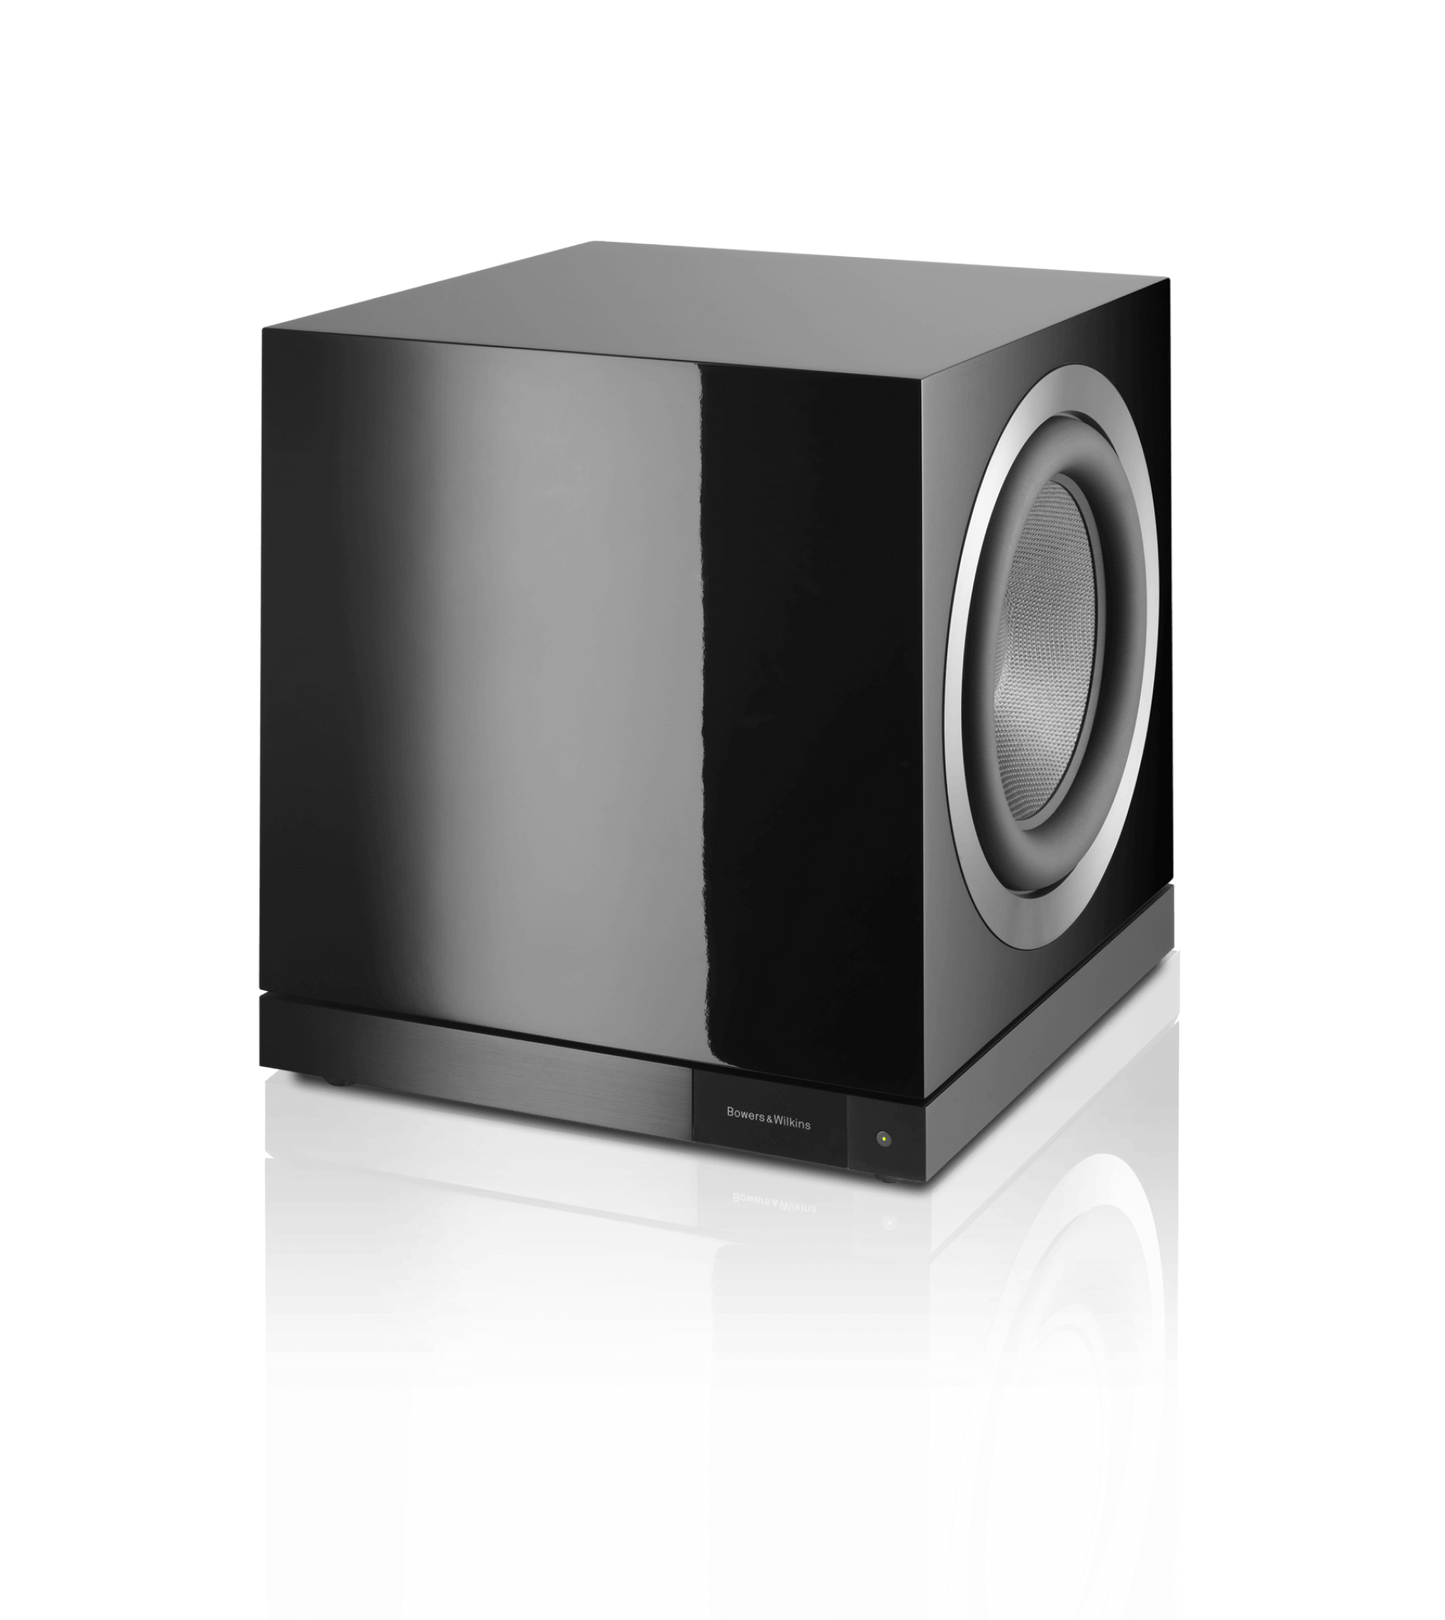 Using the same 10-in drivers found in the flagship 800 D4 speakers and a high-efficiency 1000 watt amplifier, DB2D uses intelligent DSP to optimize bass in any room. Save space, not bass DB2D's fast, solid bass complements the 800 Series Diamond speakers, and advanced room optimization makes it easy to position. 